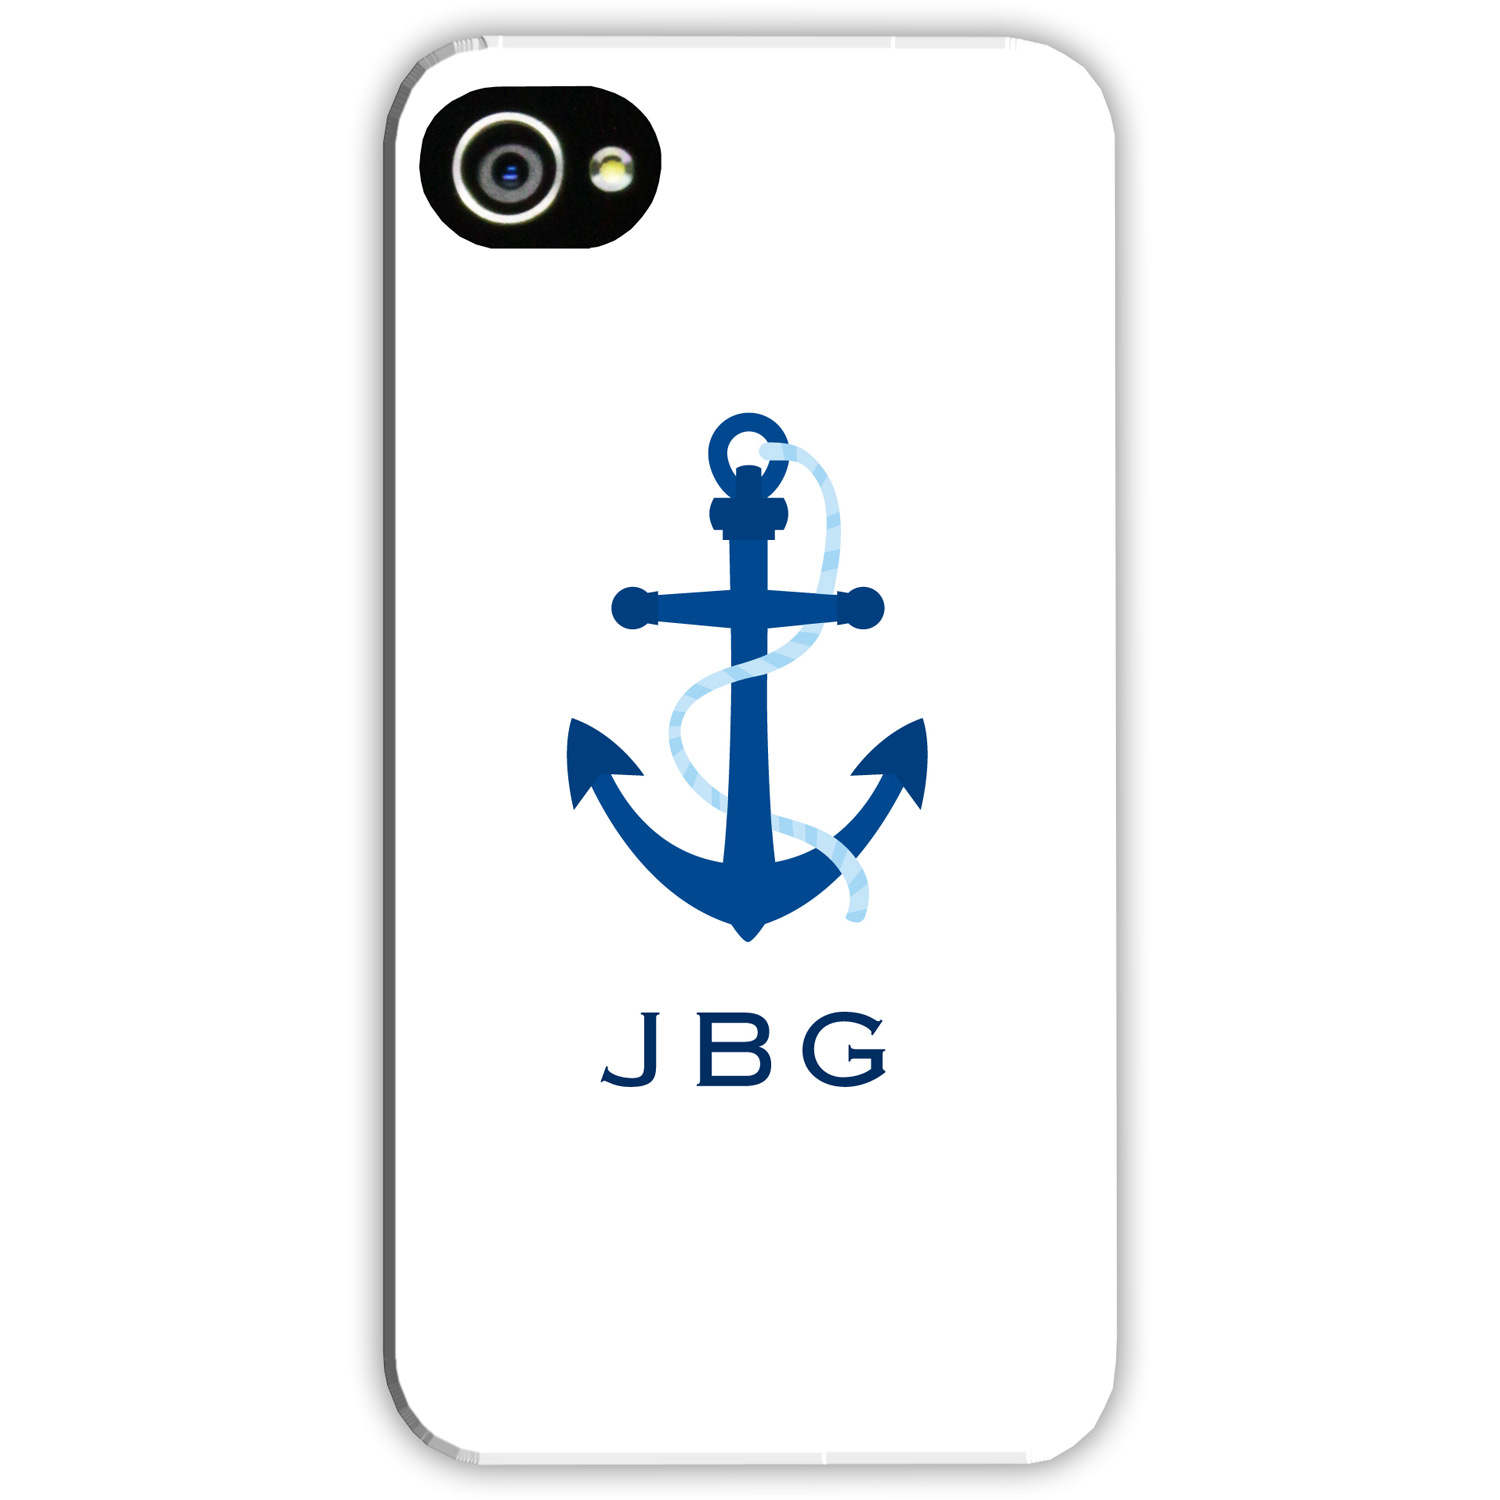 Boatman Geller Personalized Cell Phone Case Anchor Stripe Red ...